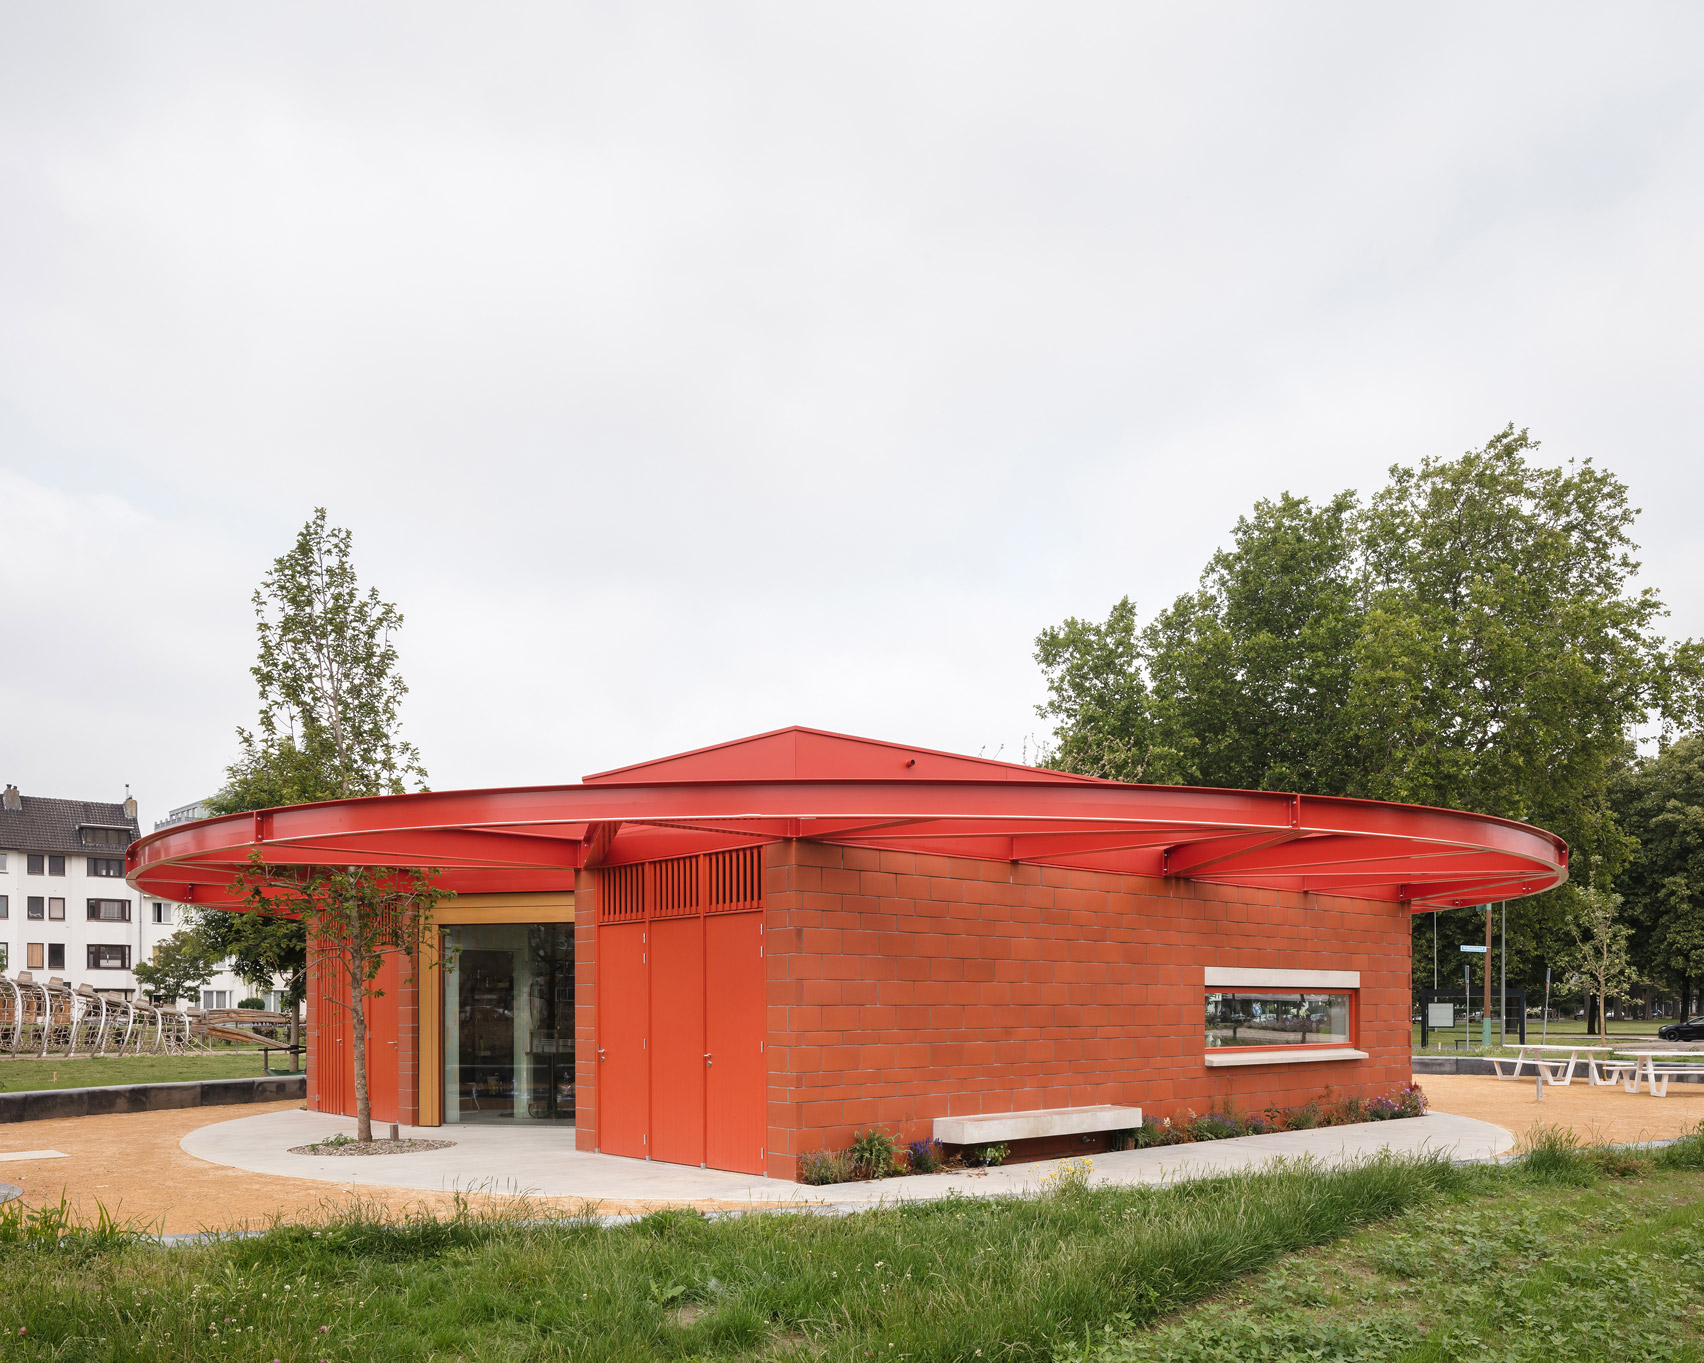 Carousel-like red pavilion in Holland